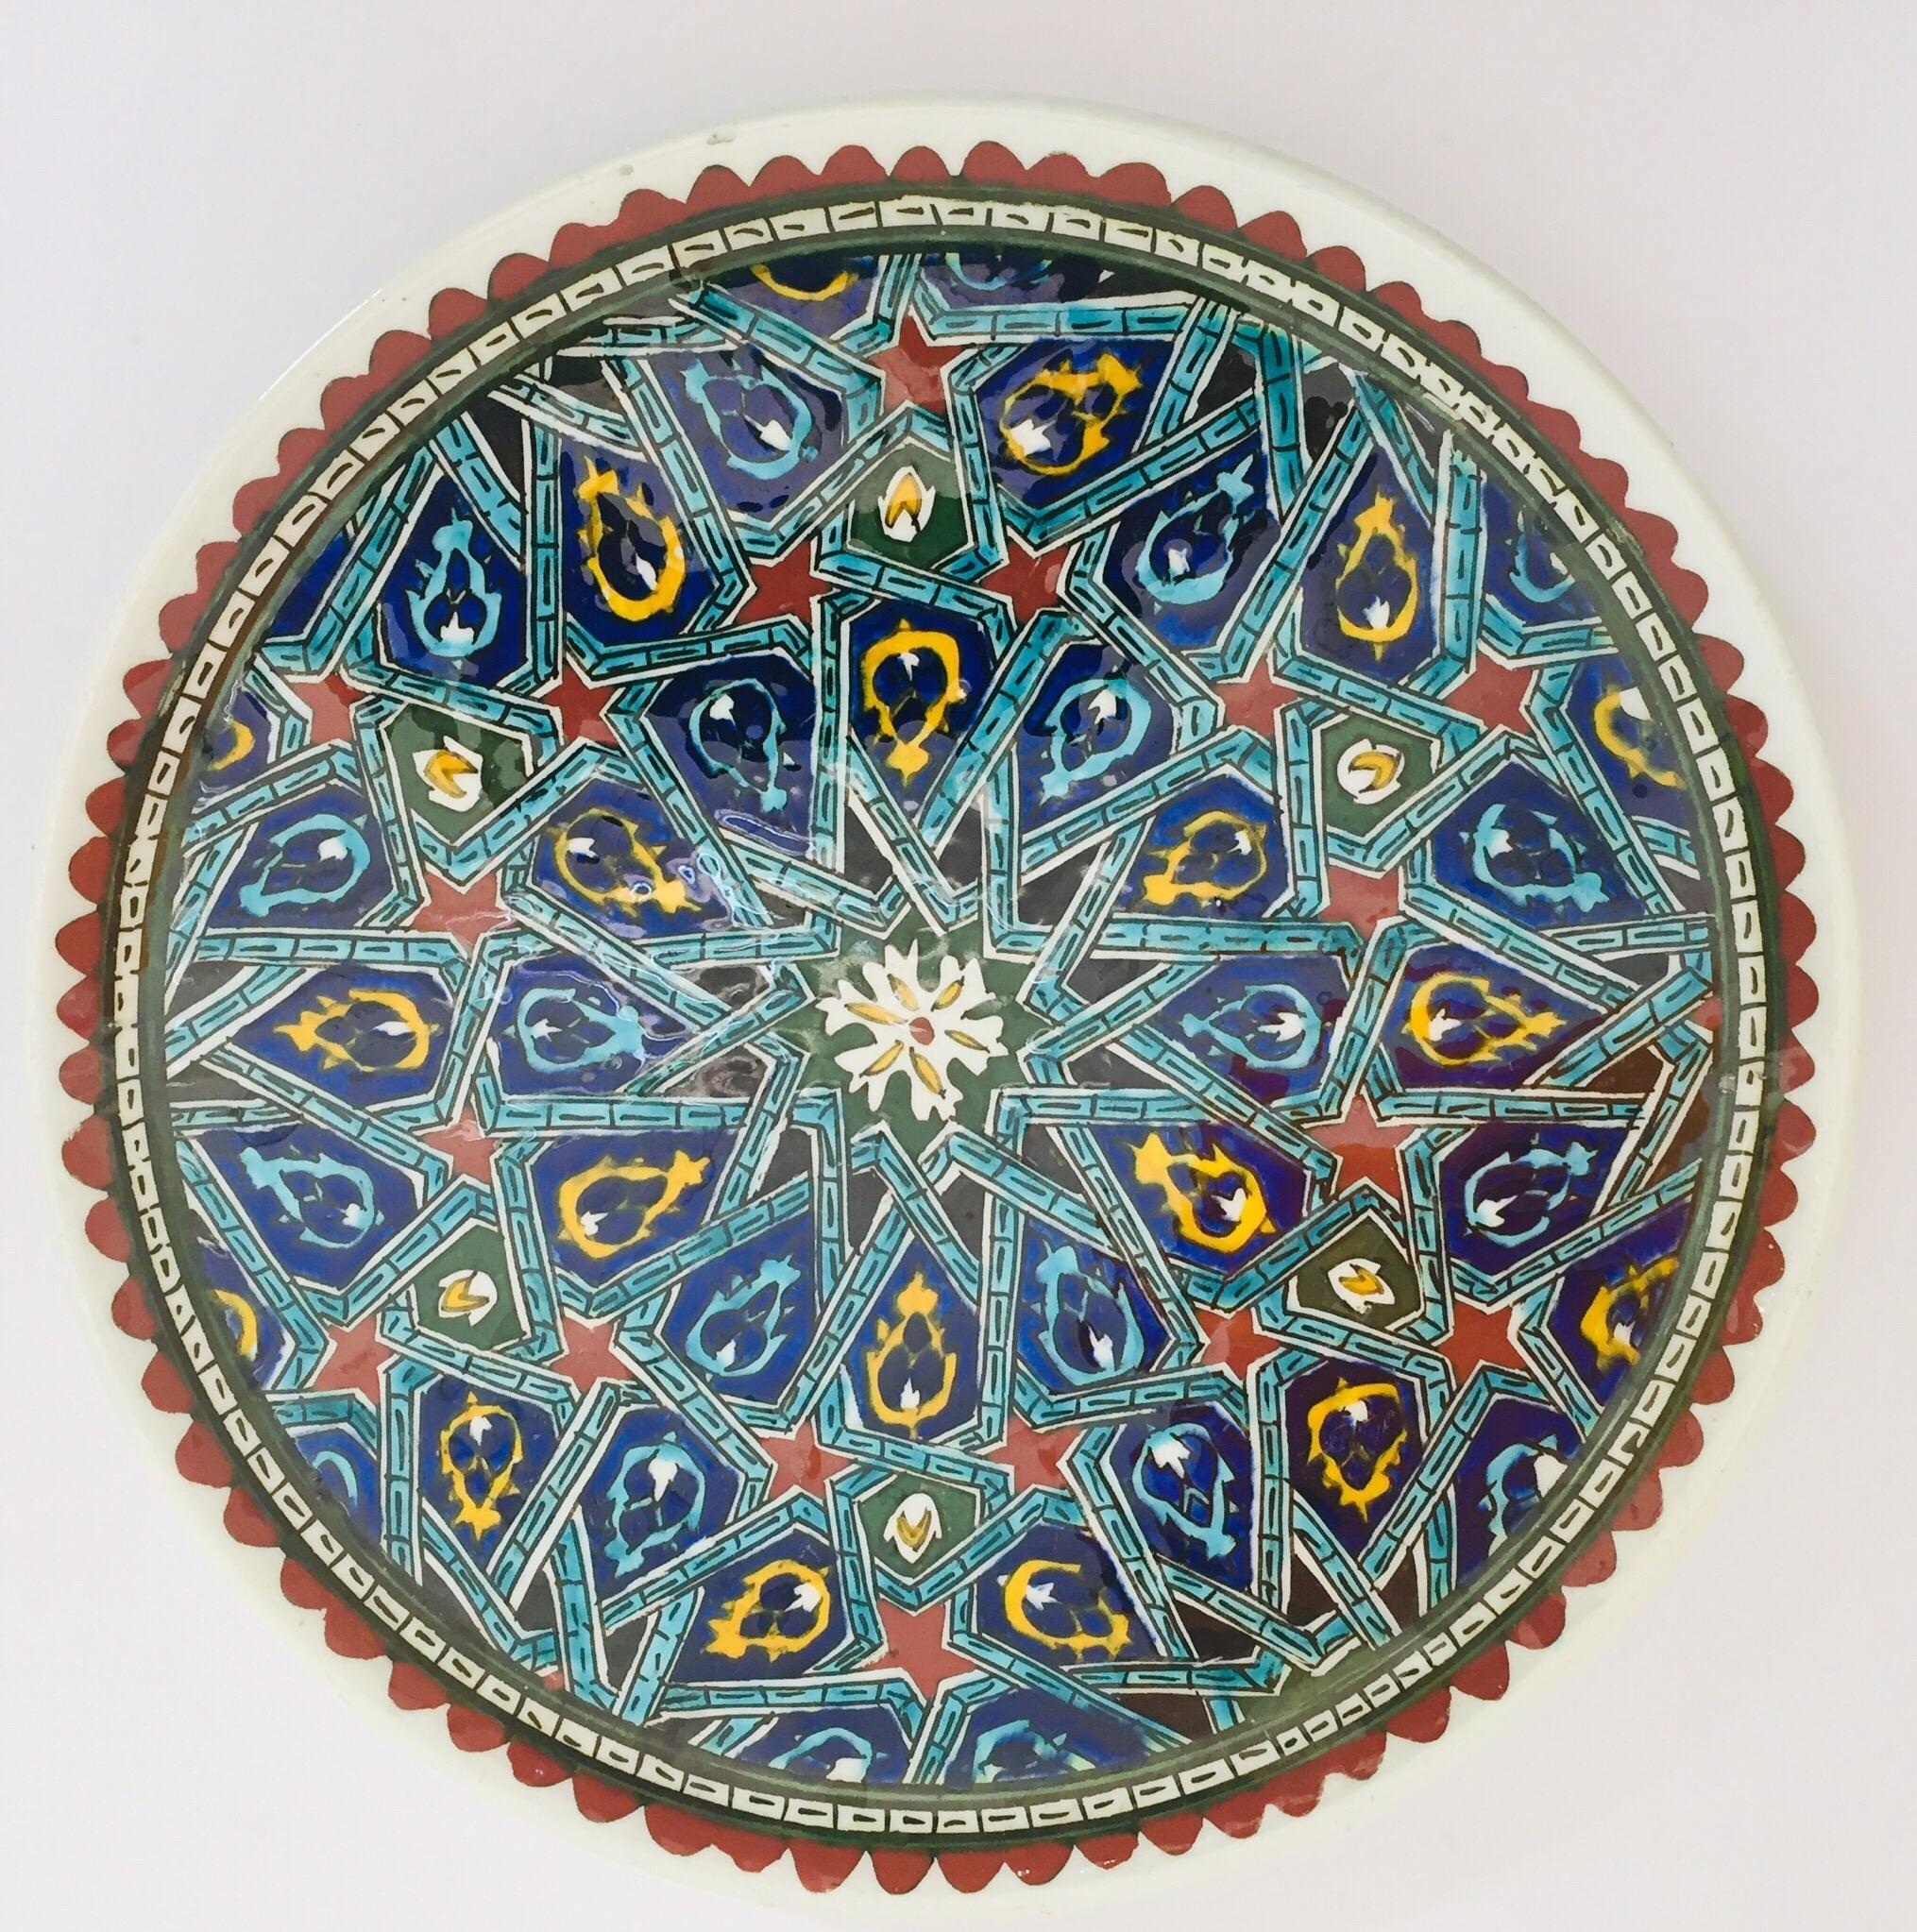 Polychrome hand painted and handcrafted ceramic wall decorative plate with polychrome Ottoman floral design.
This is an intricately, hand painted Moorish plate that was made in Turkey.
Turkey is famous for its kiln products, such as tiles and